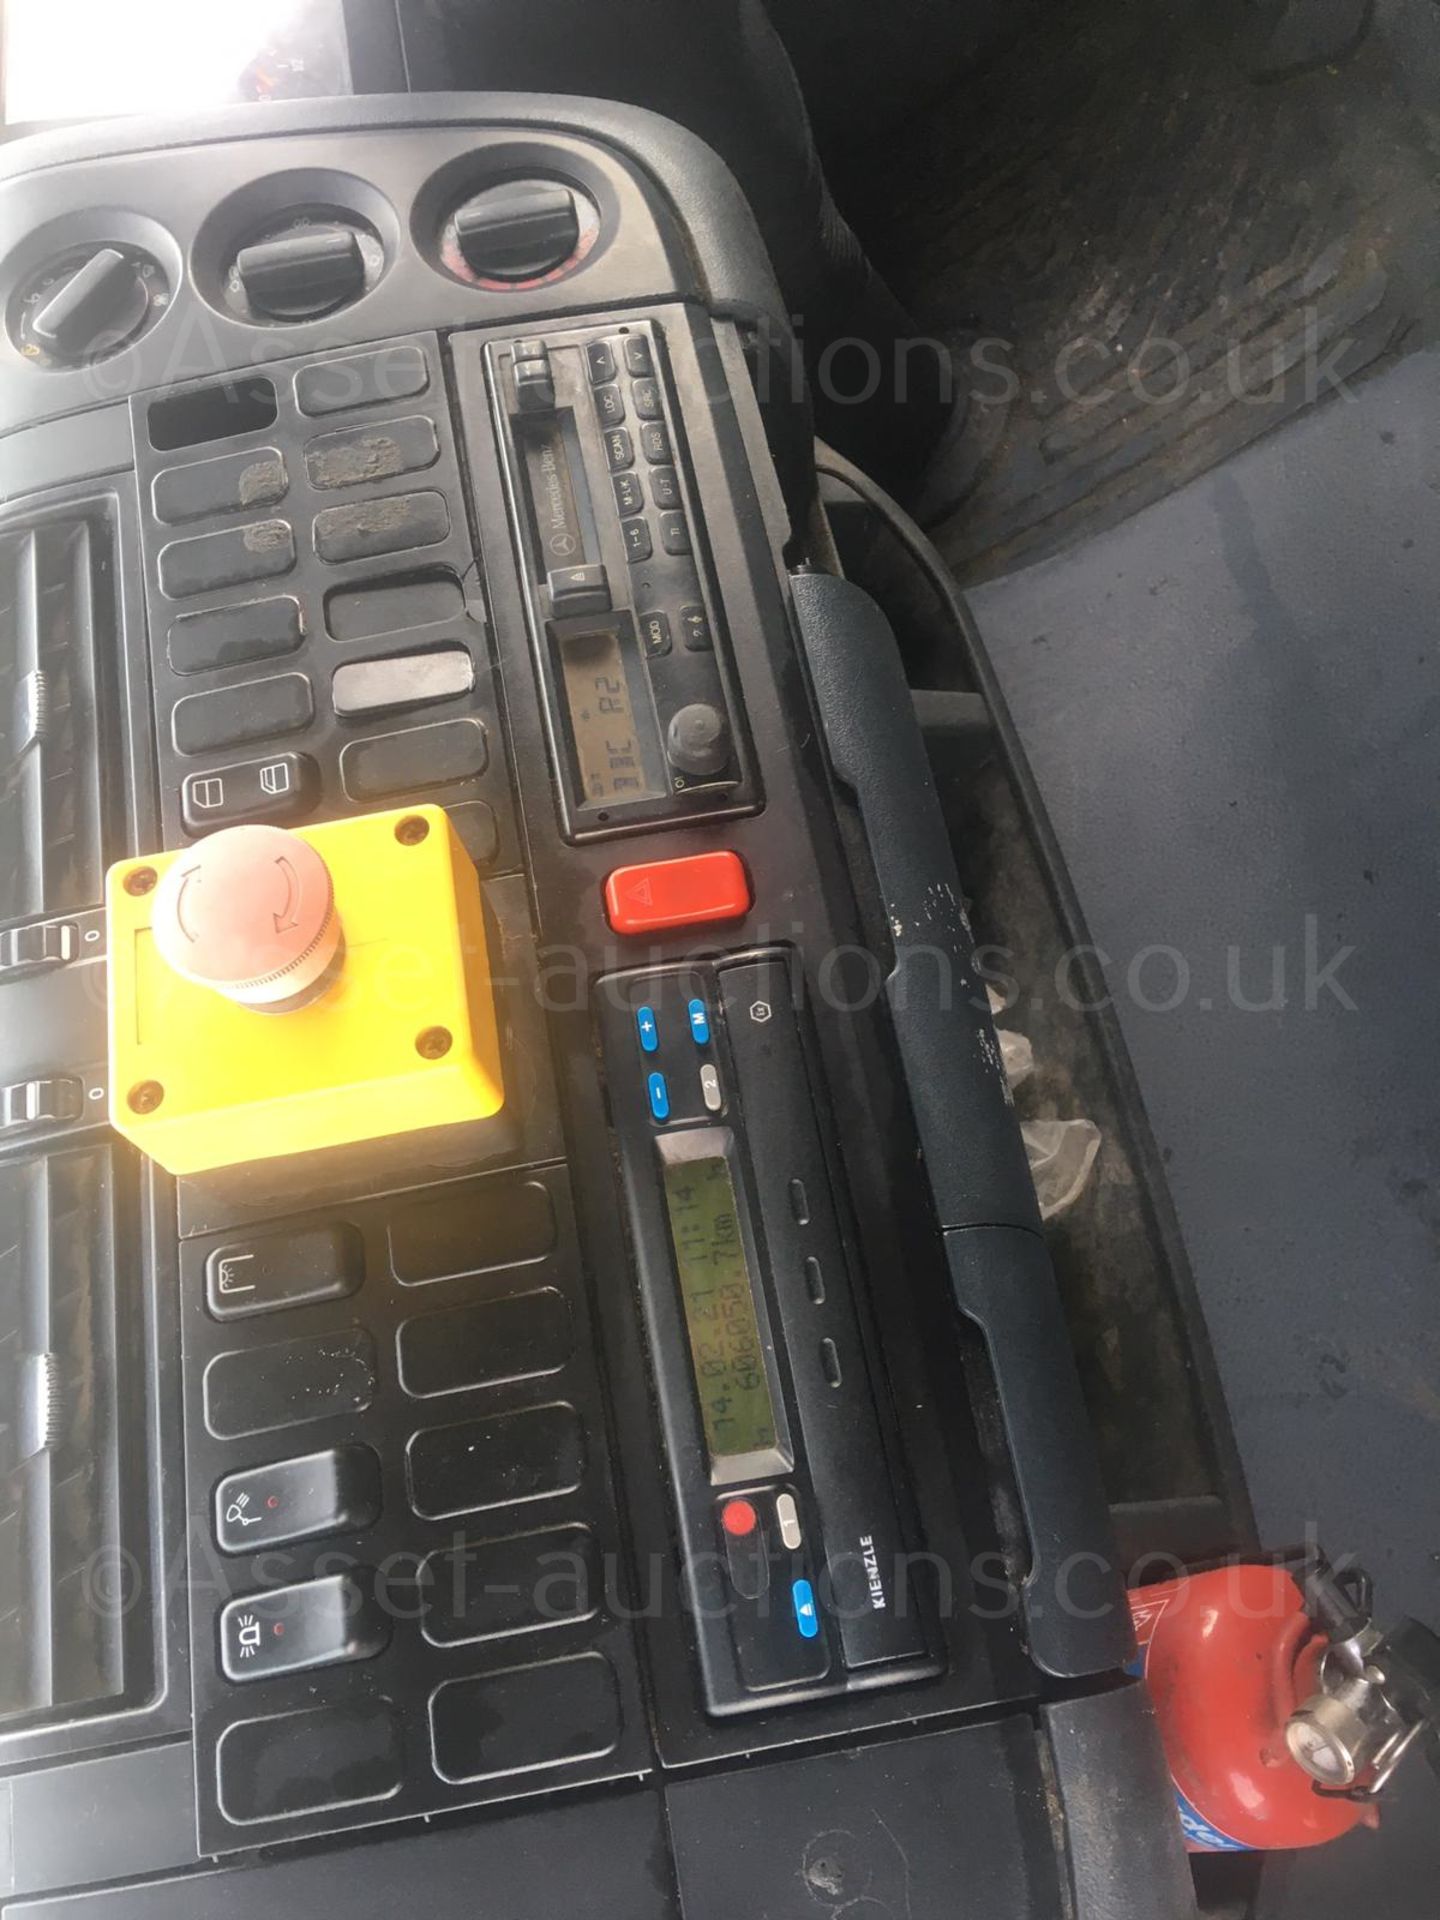 2004/54 REG MERCEDES ATEGO 1018 DAY YELLOW DROPSIDE LINE PAINTING LORRY 4.3L DIESEL ENGINE *NO VAT* - Image 29 of 62